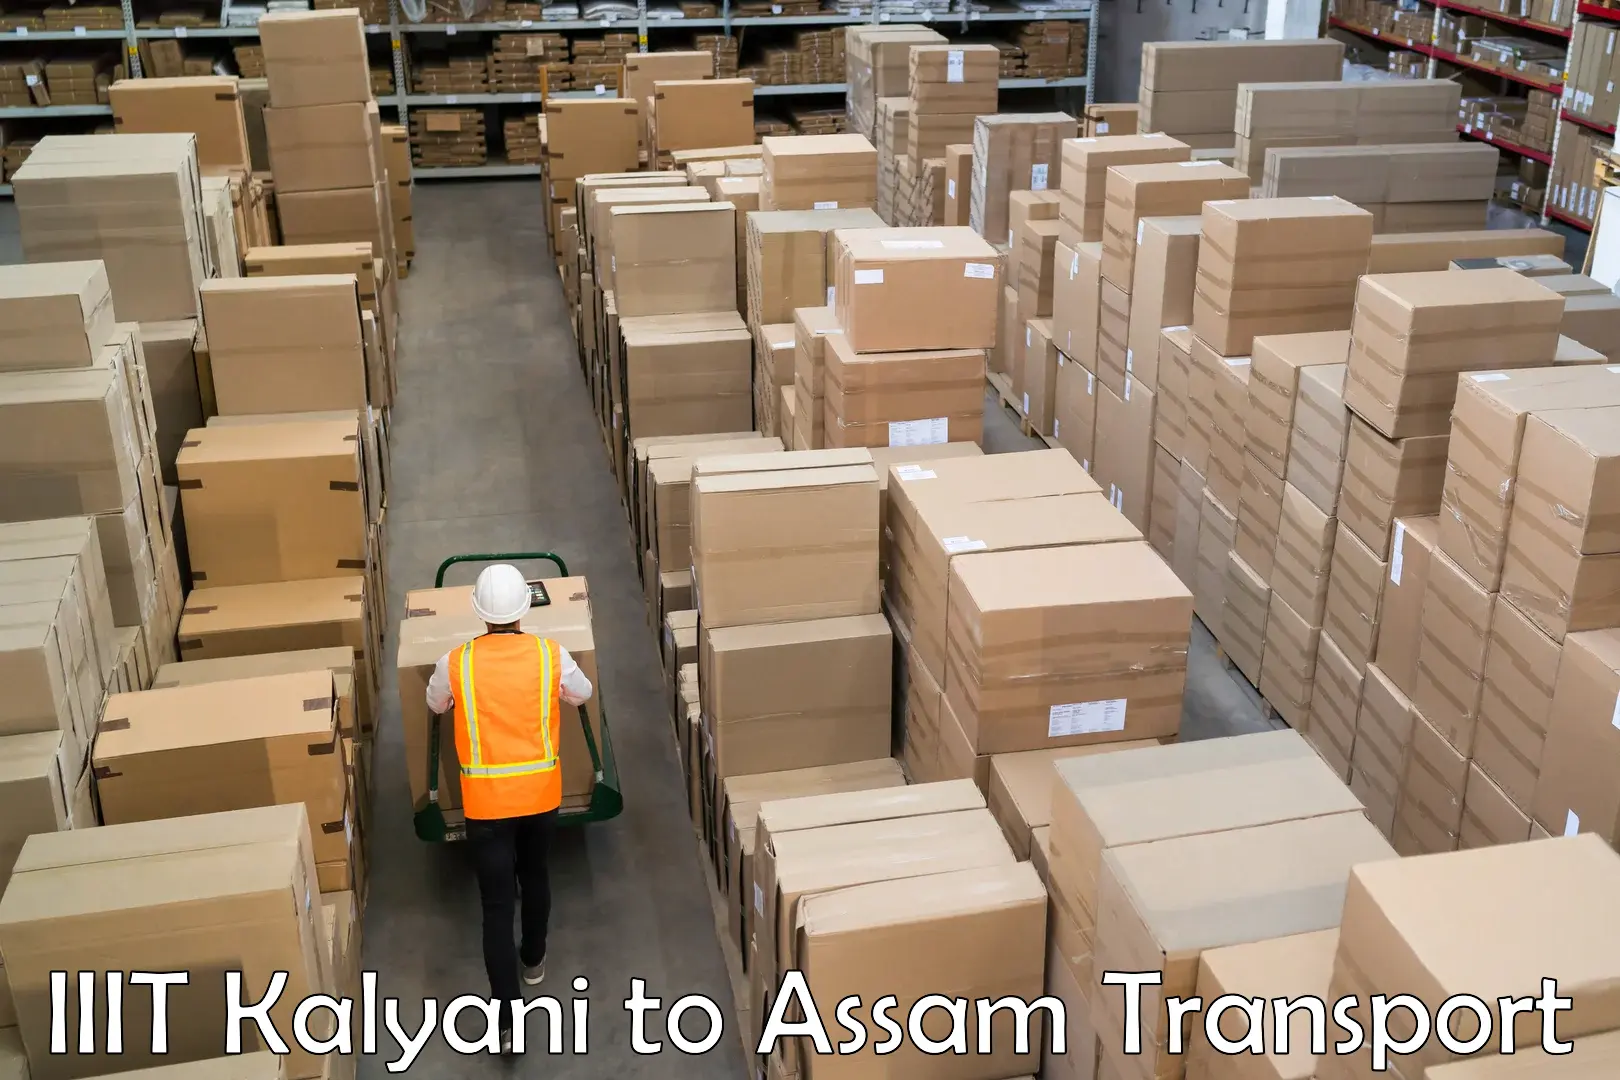 Container transport service IIIT Kalyani to Mayang